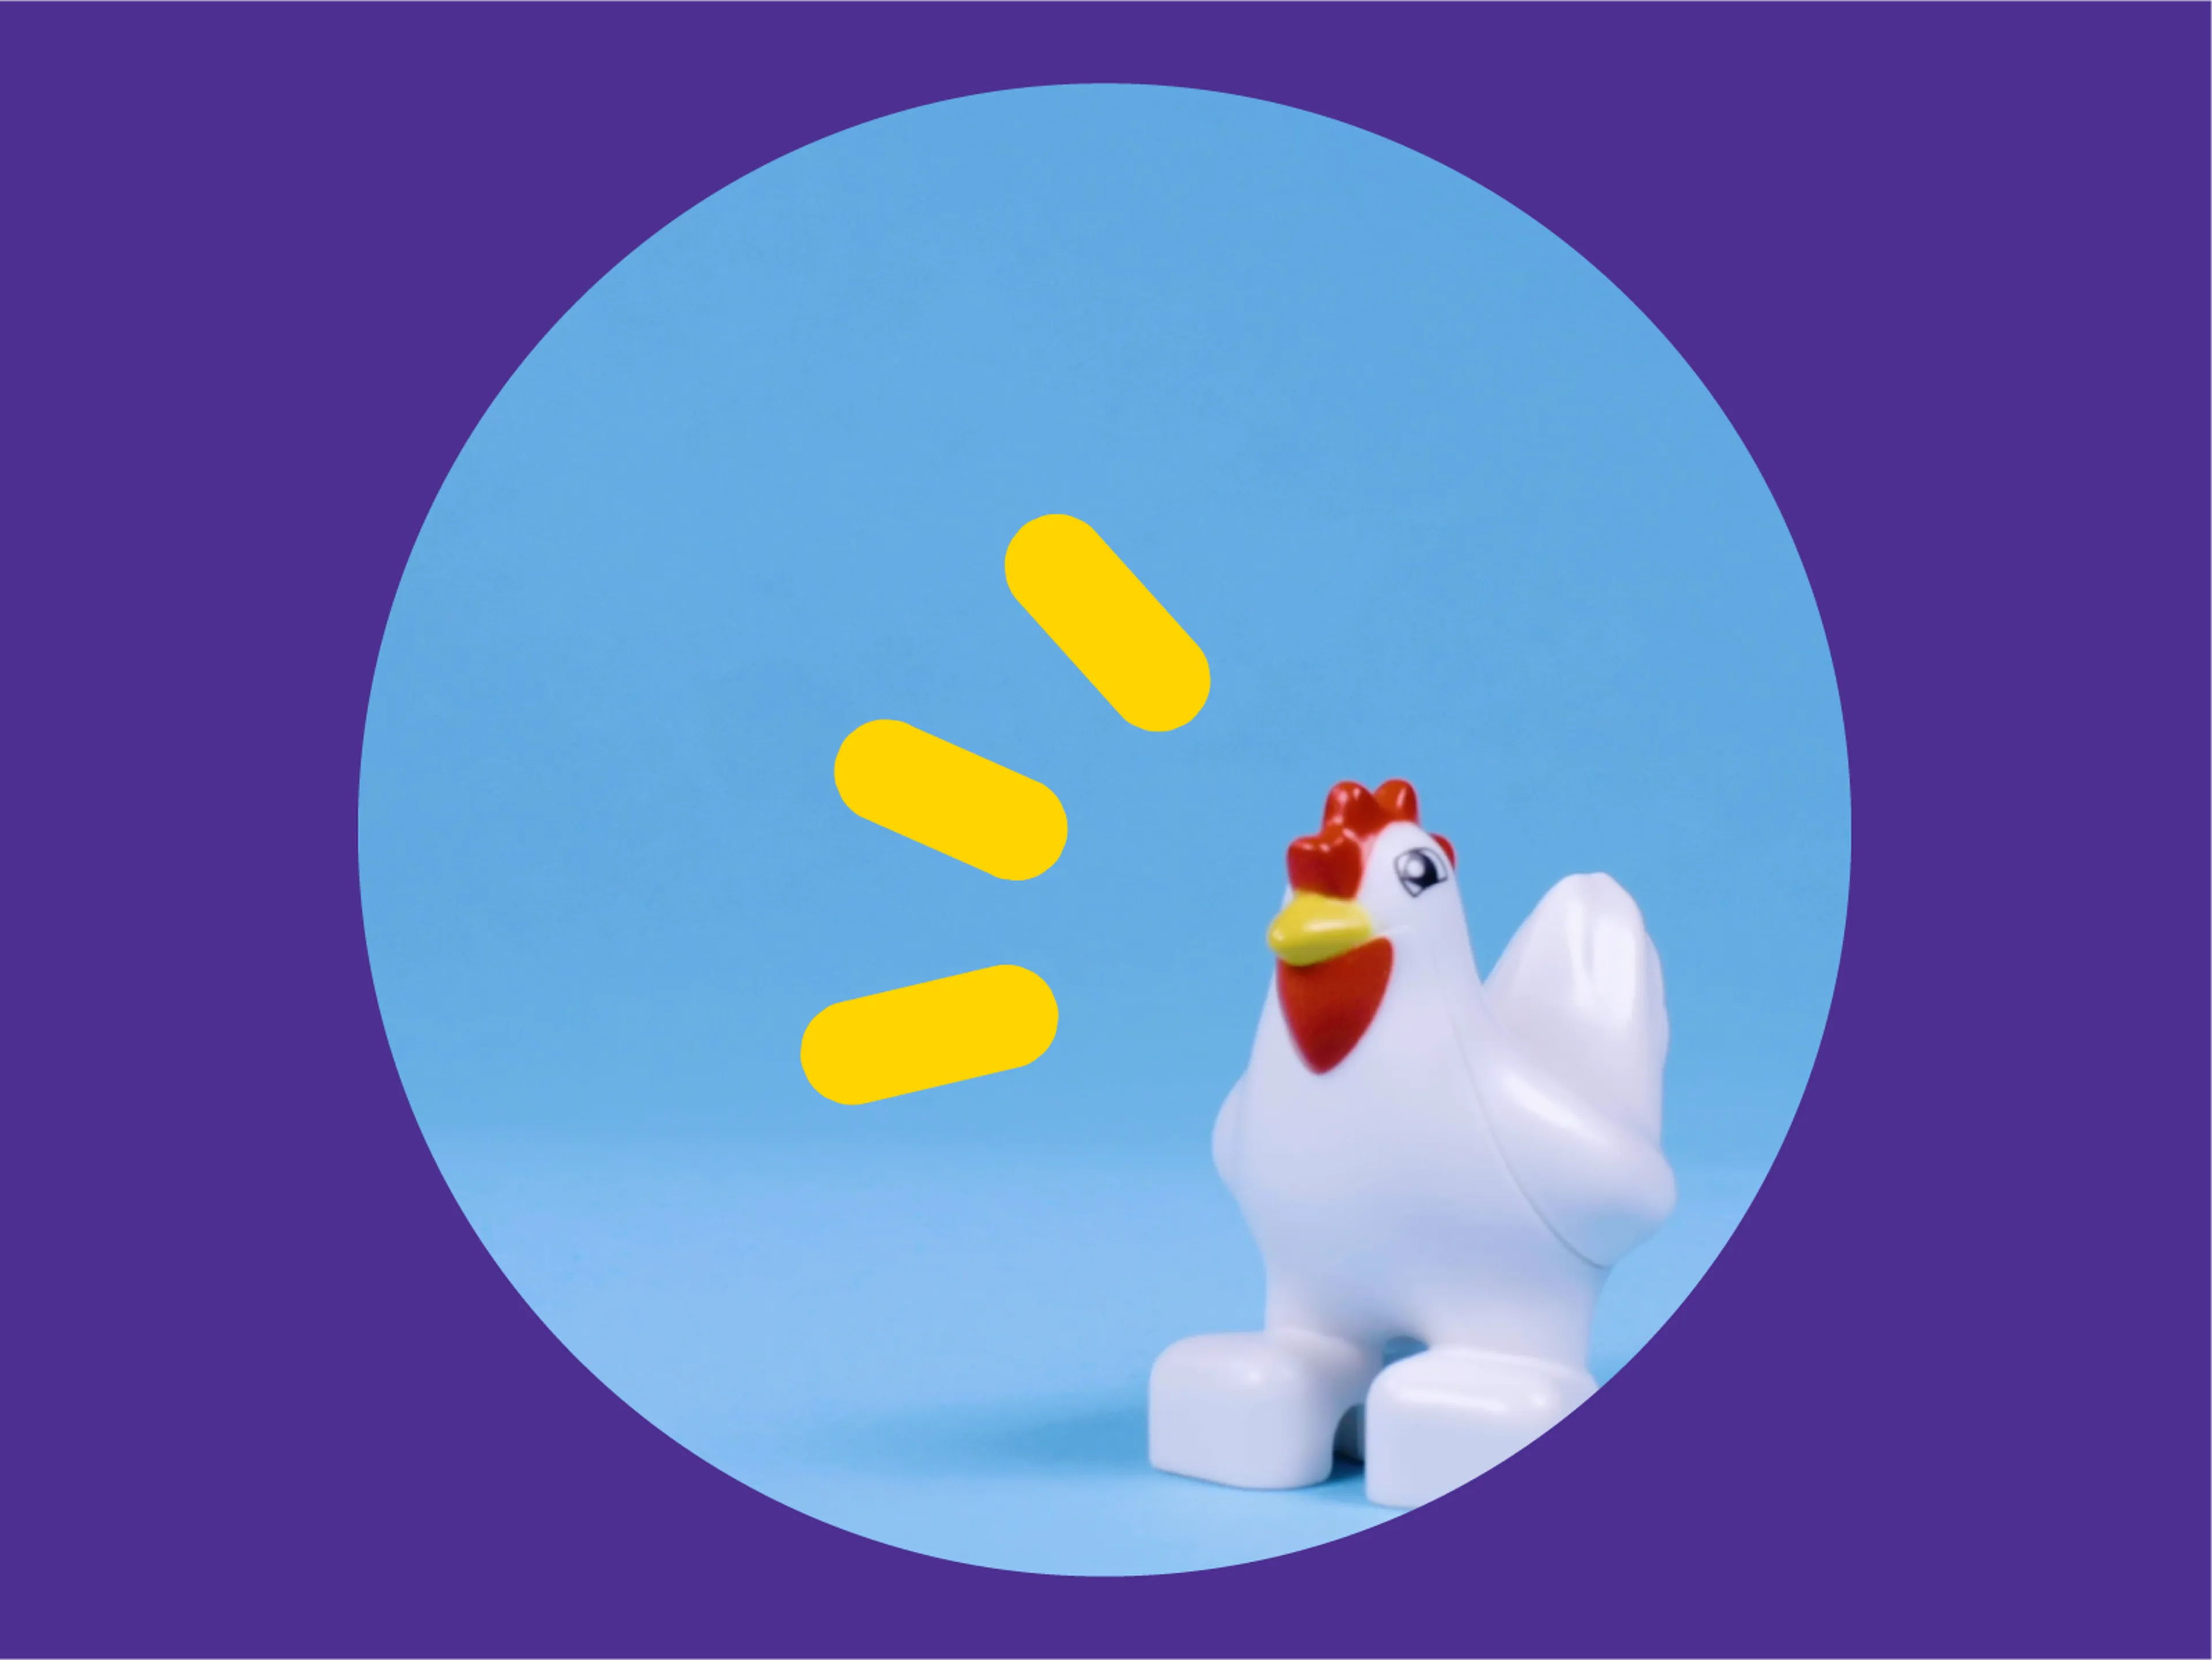 An image of a LEGO DUPLO chicken